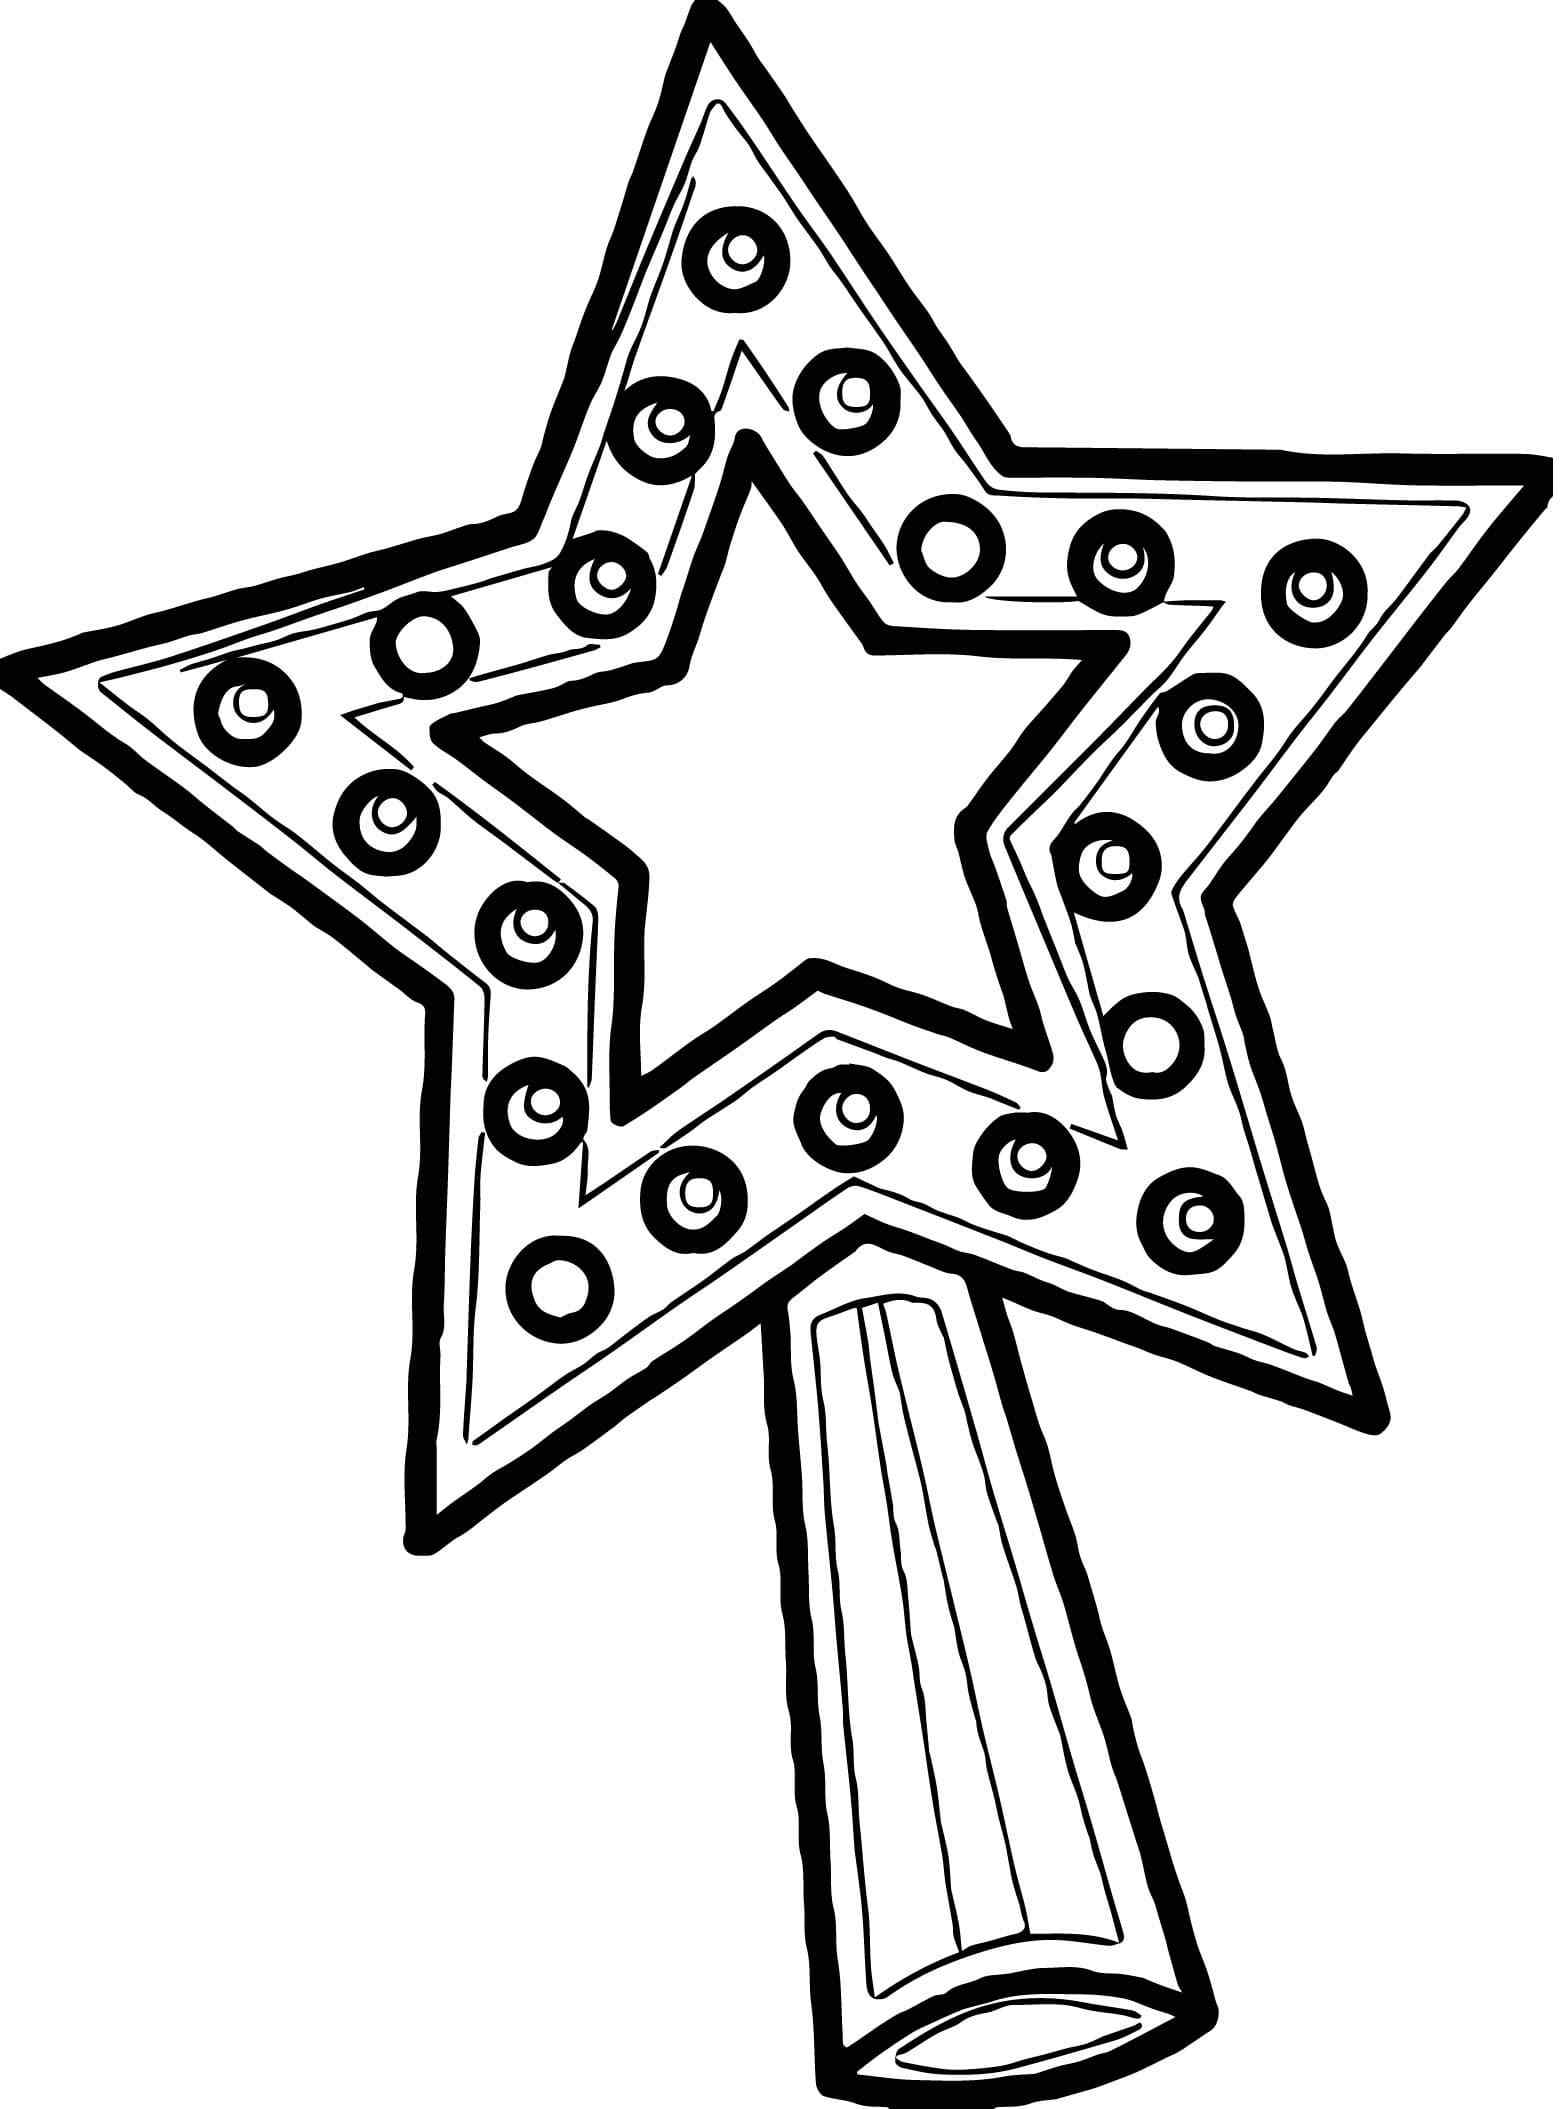 Five-pointed Star